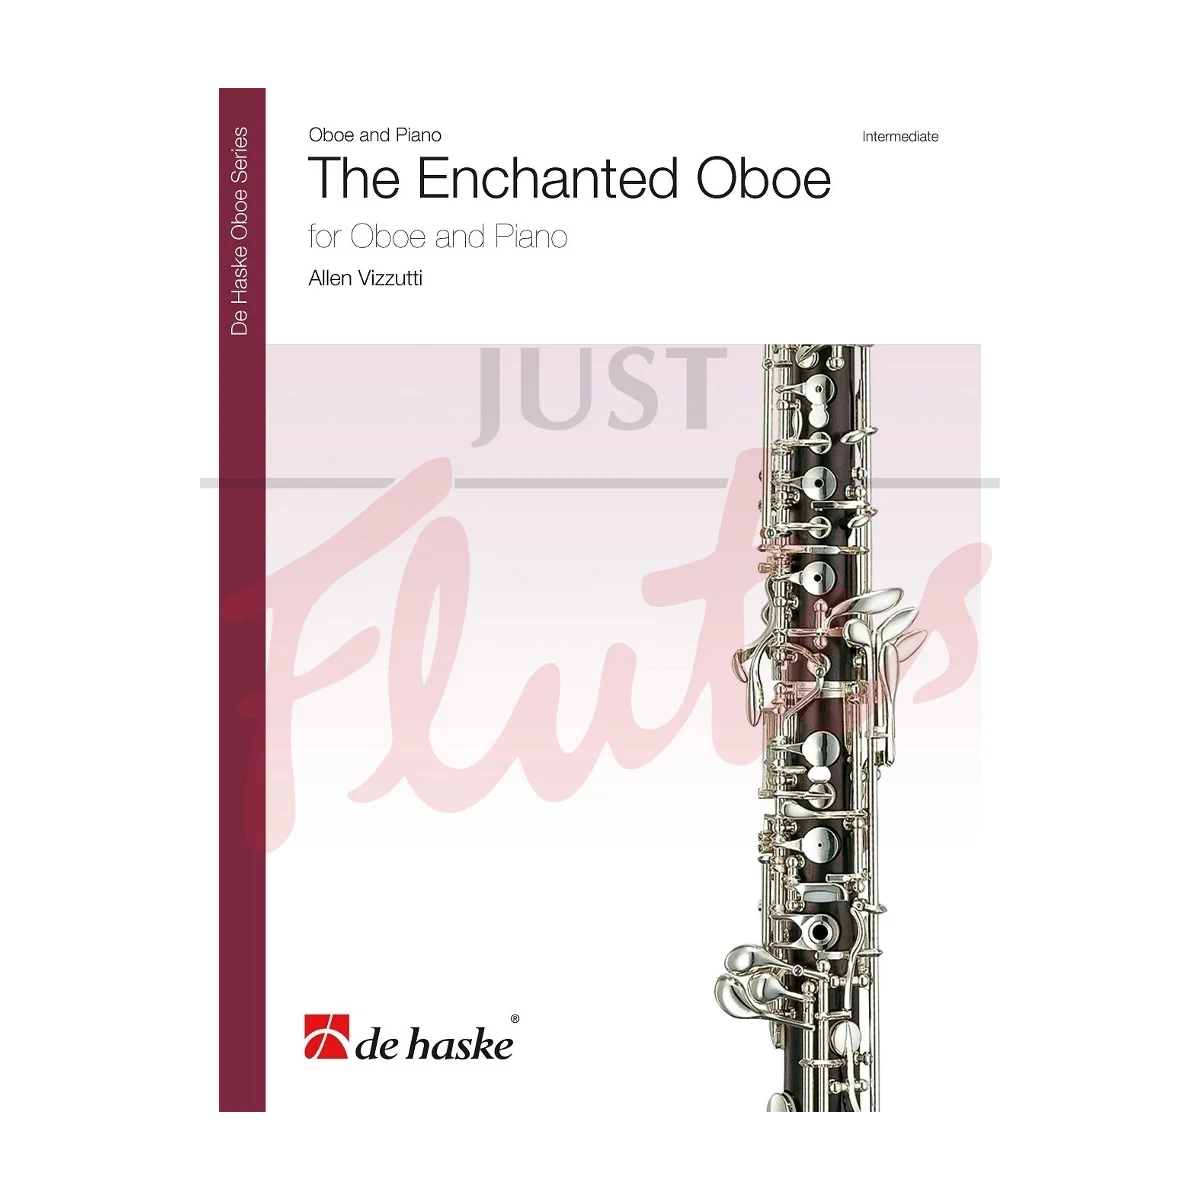 The Enchanted Oboe for Oboe and Piano